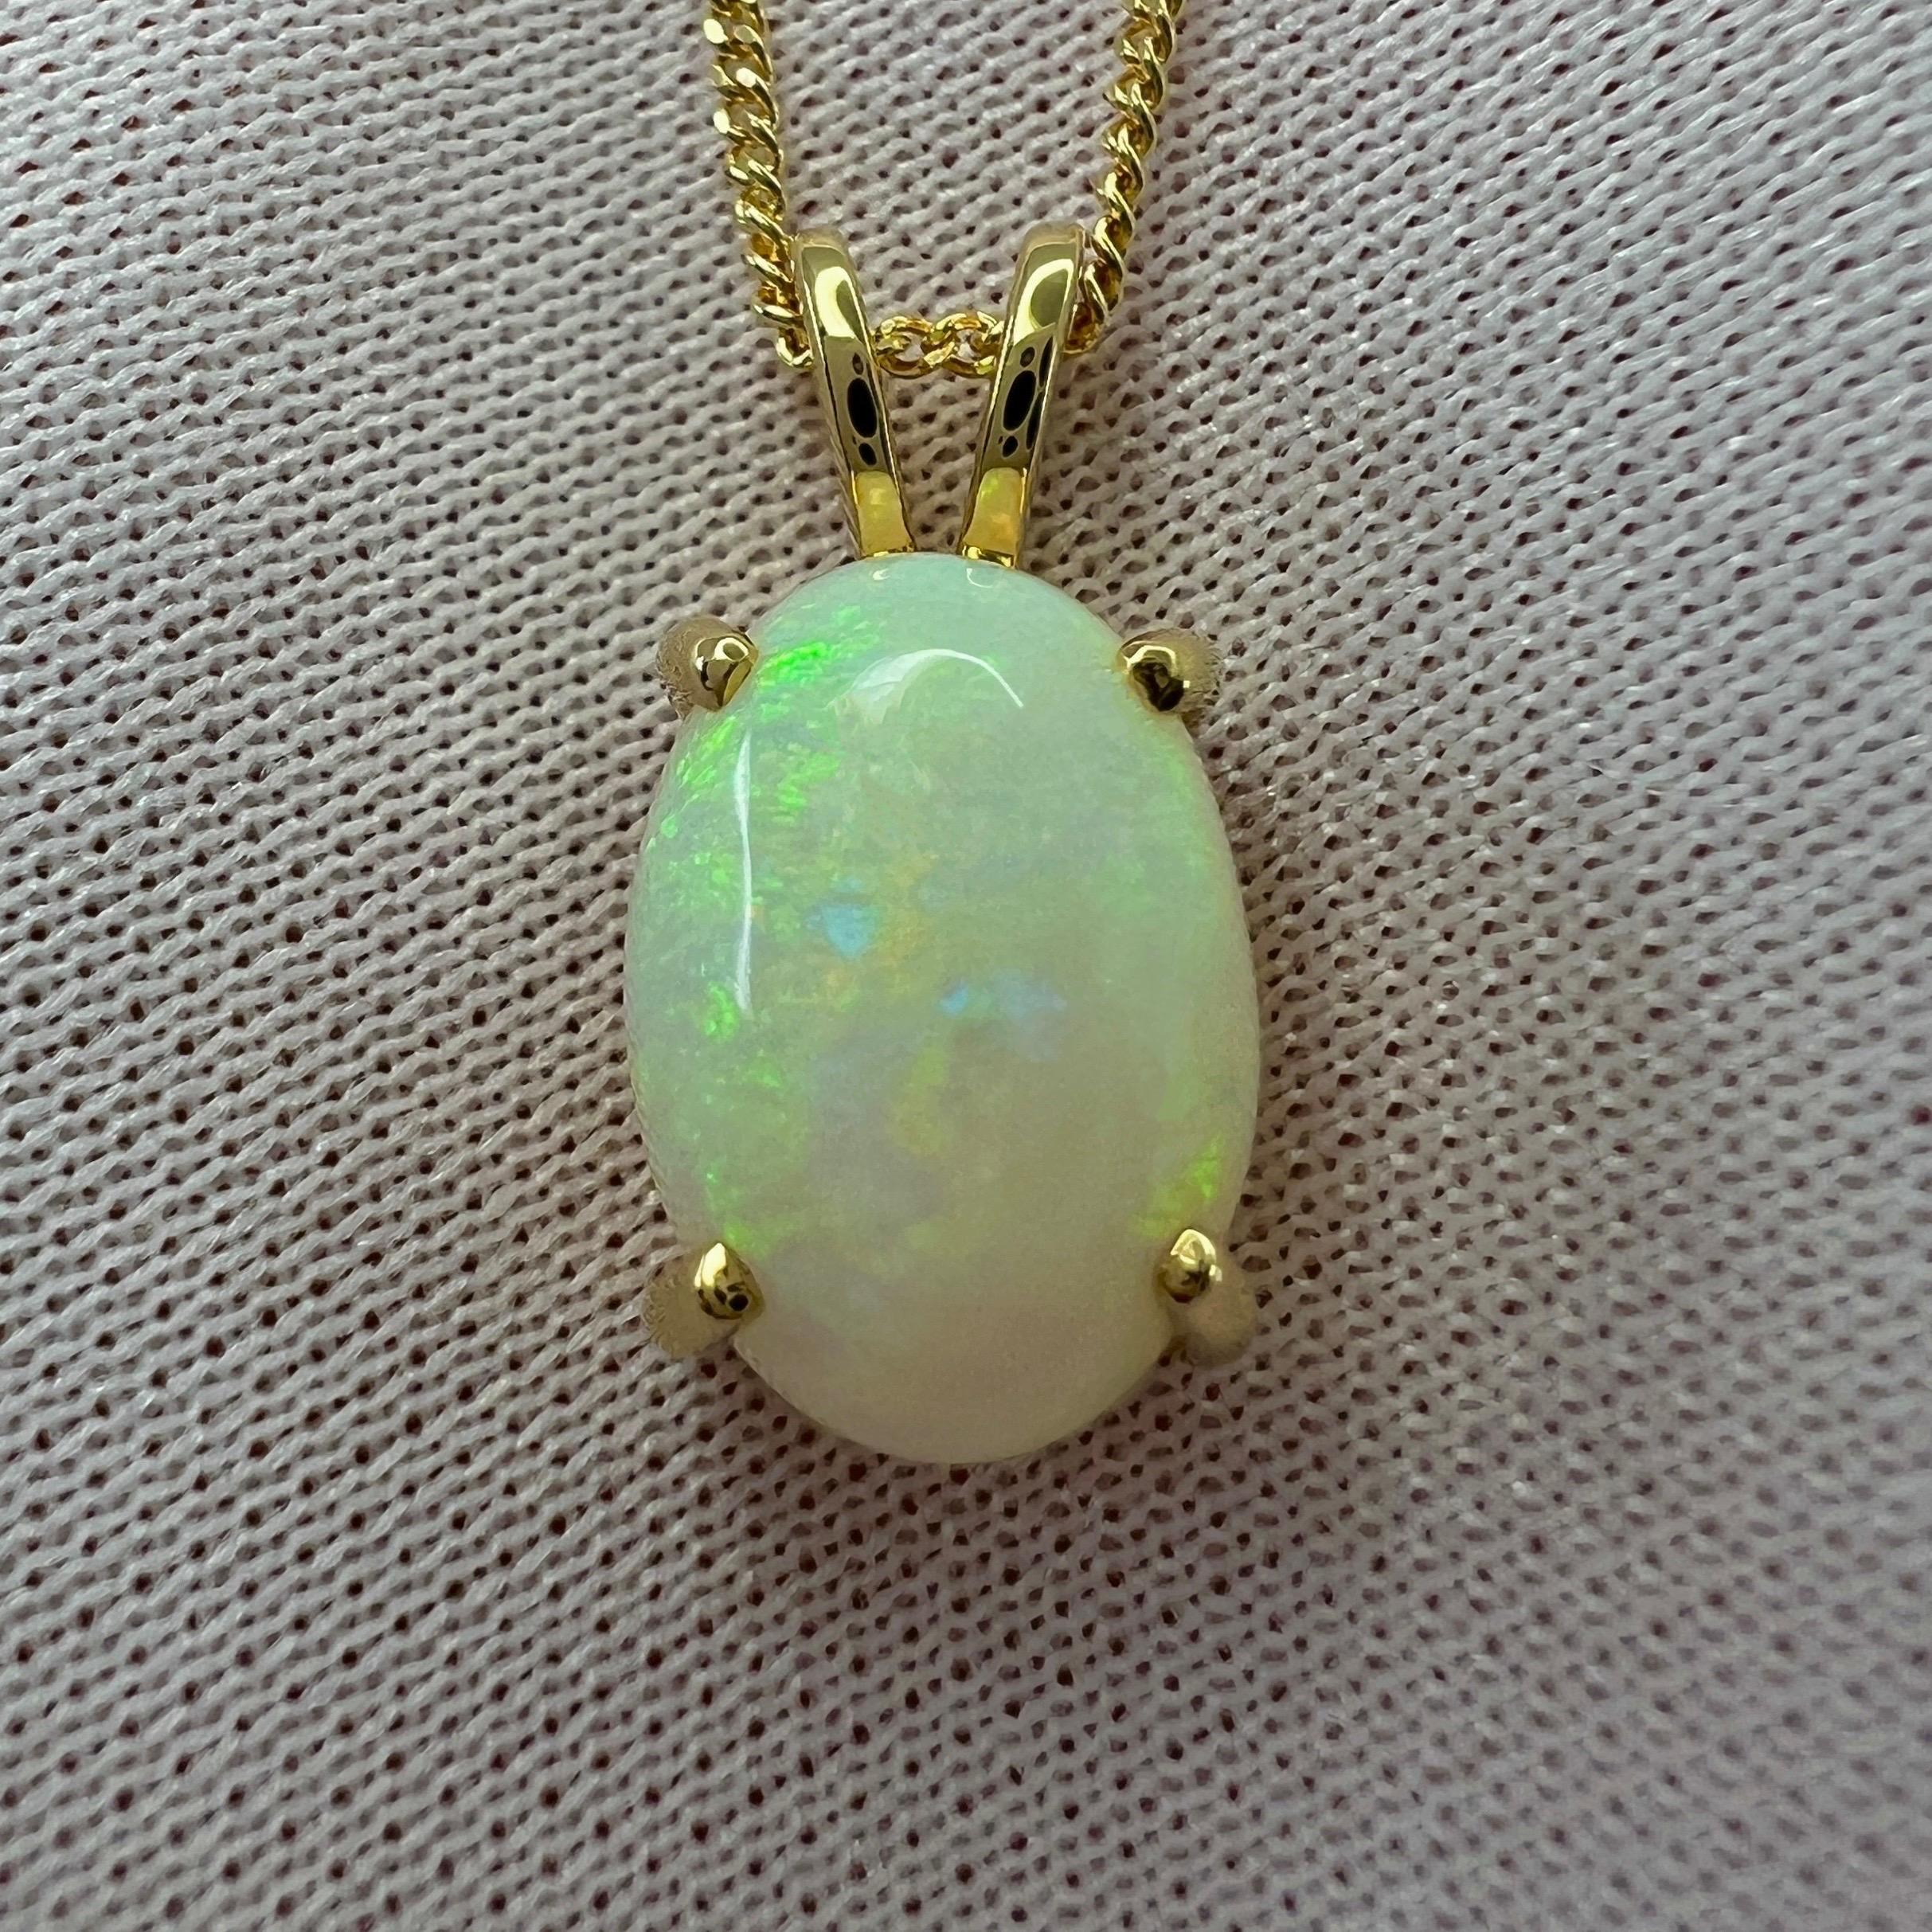 3ct Fine Australian White Opal Oval Cabochon 18k Yellow Gold Pendant Necklace For Sale 2